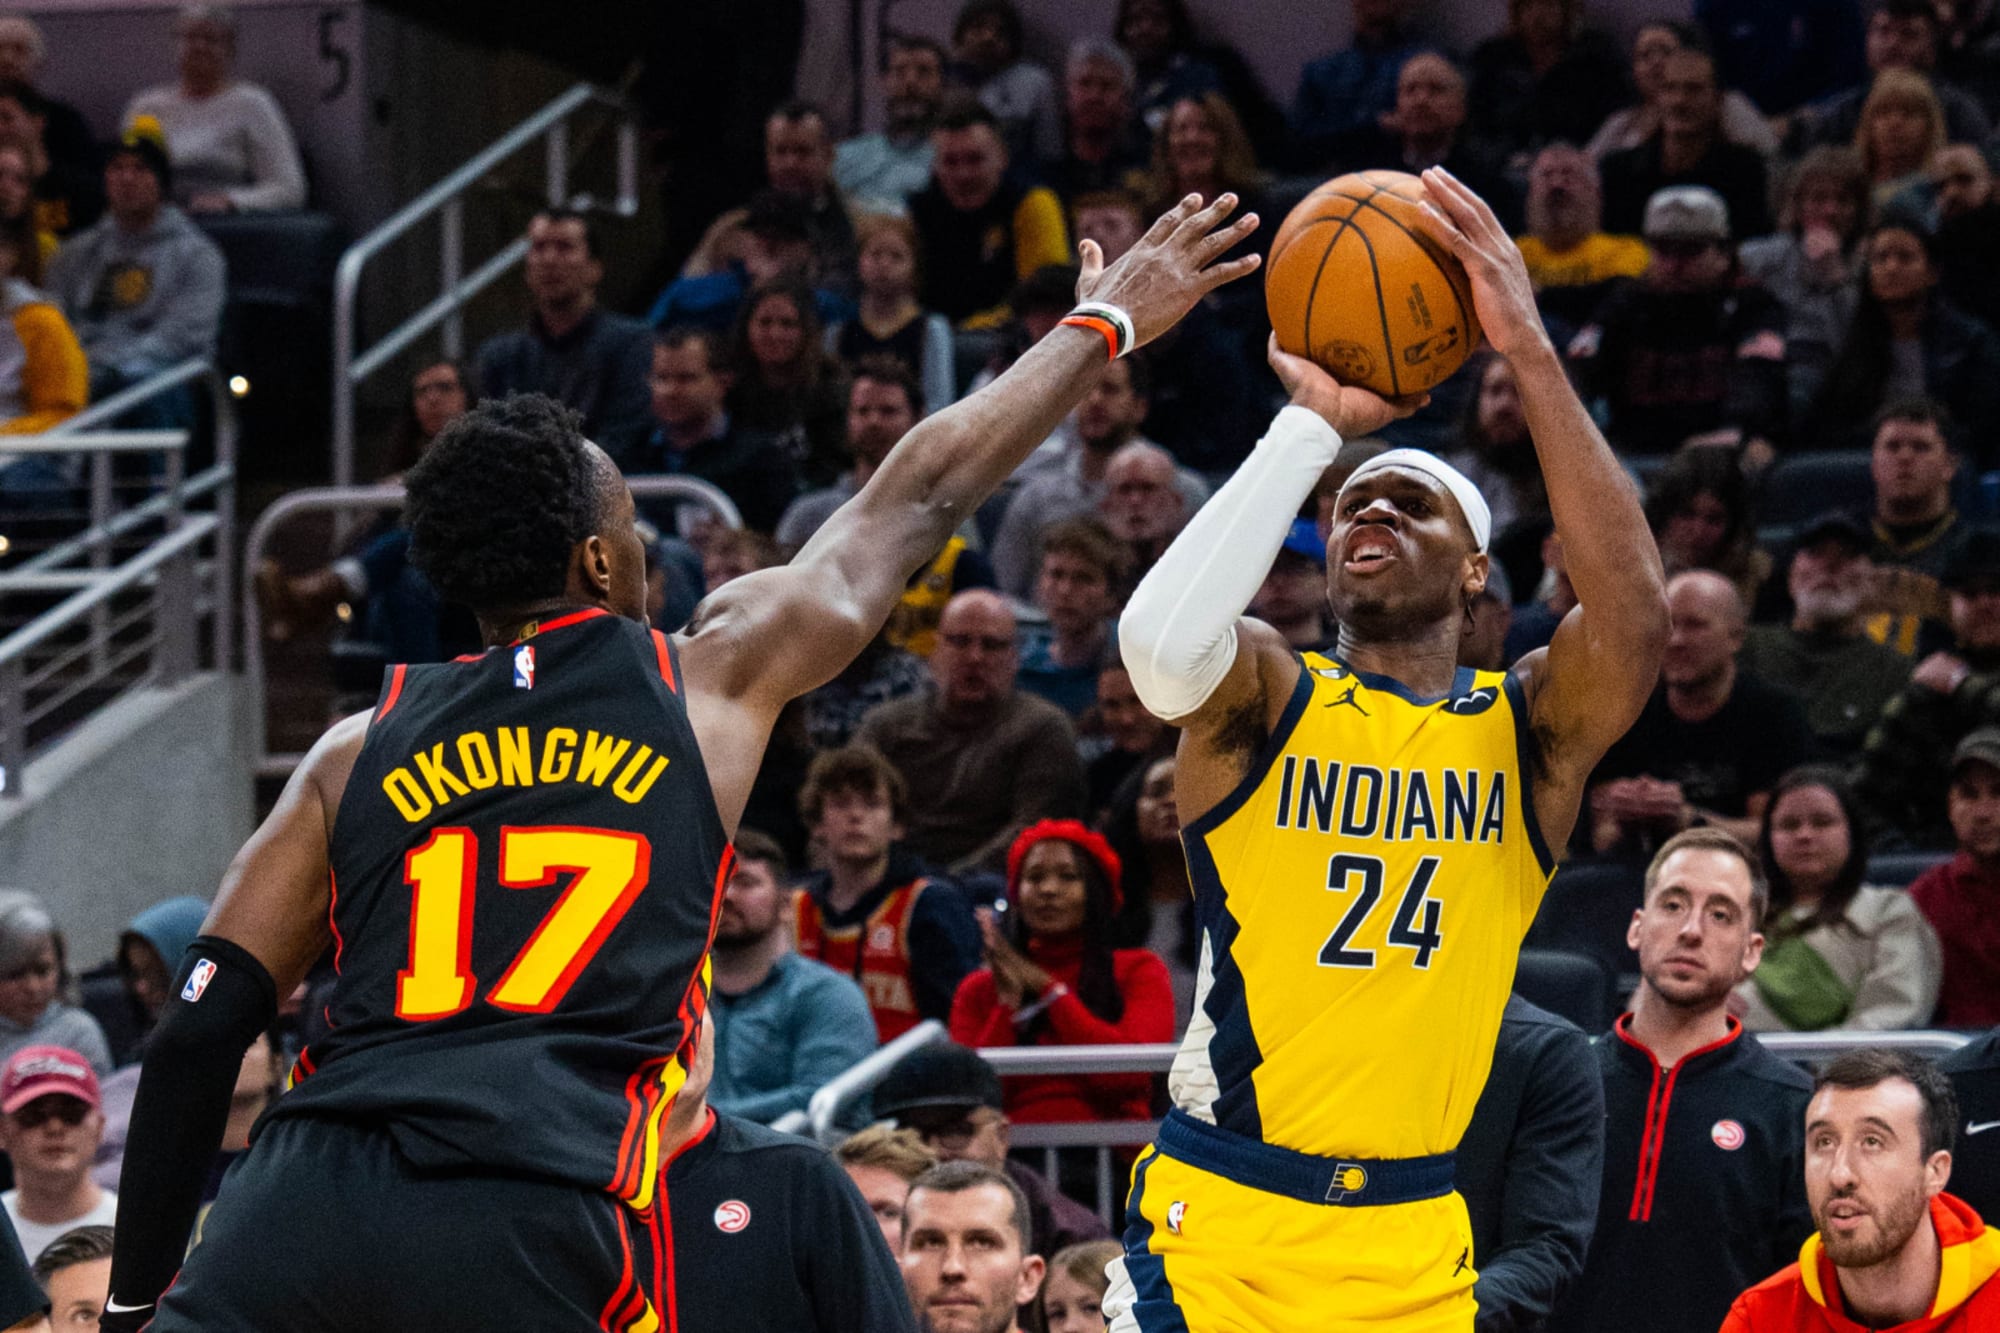 Bulls vs. Pacers prediction and pick for Tuesday, January 24